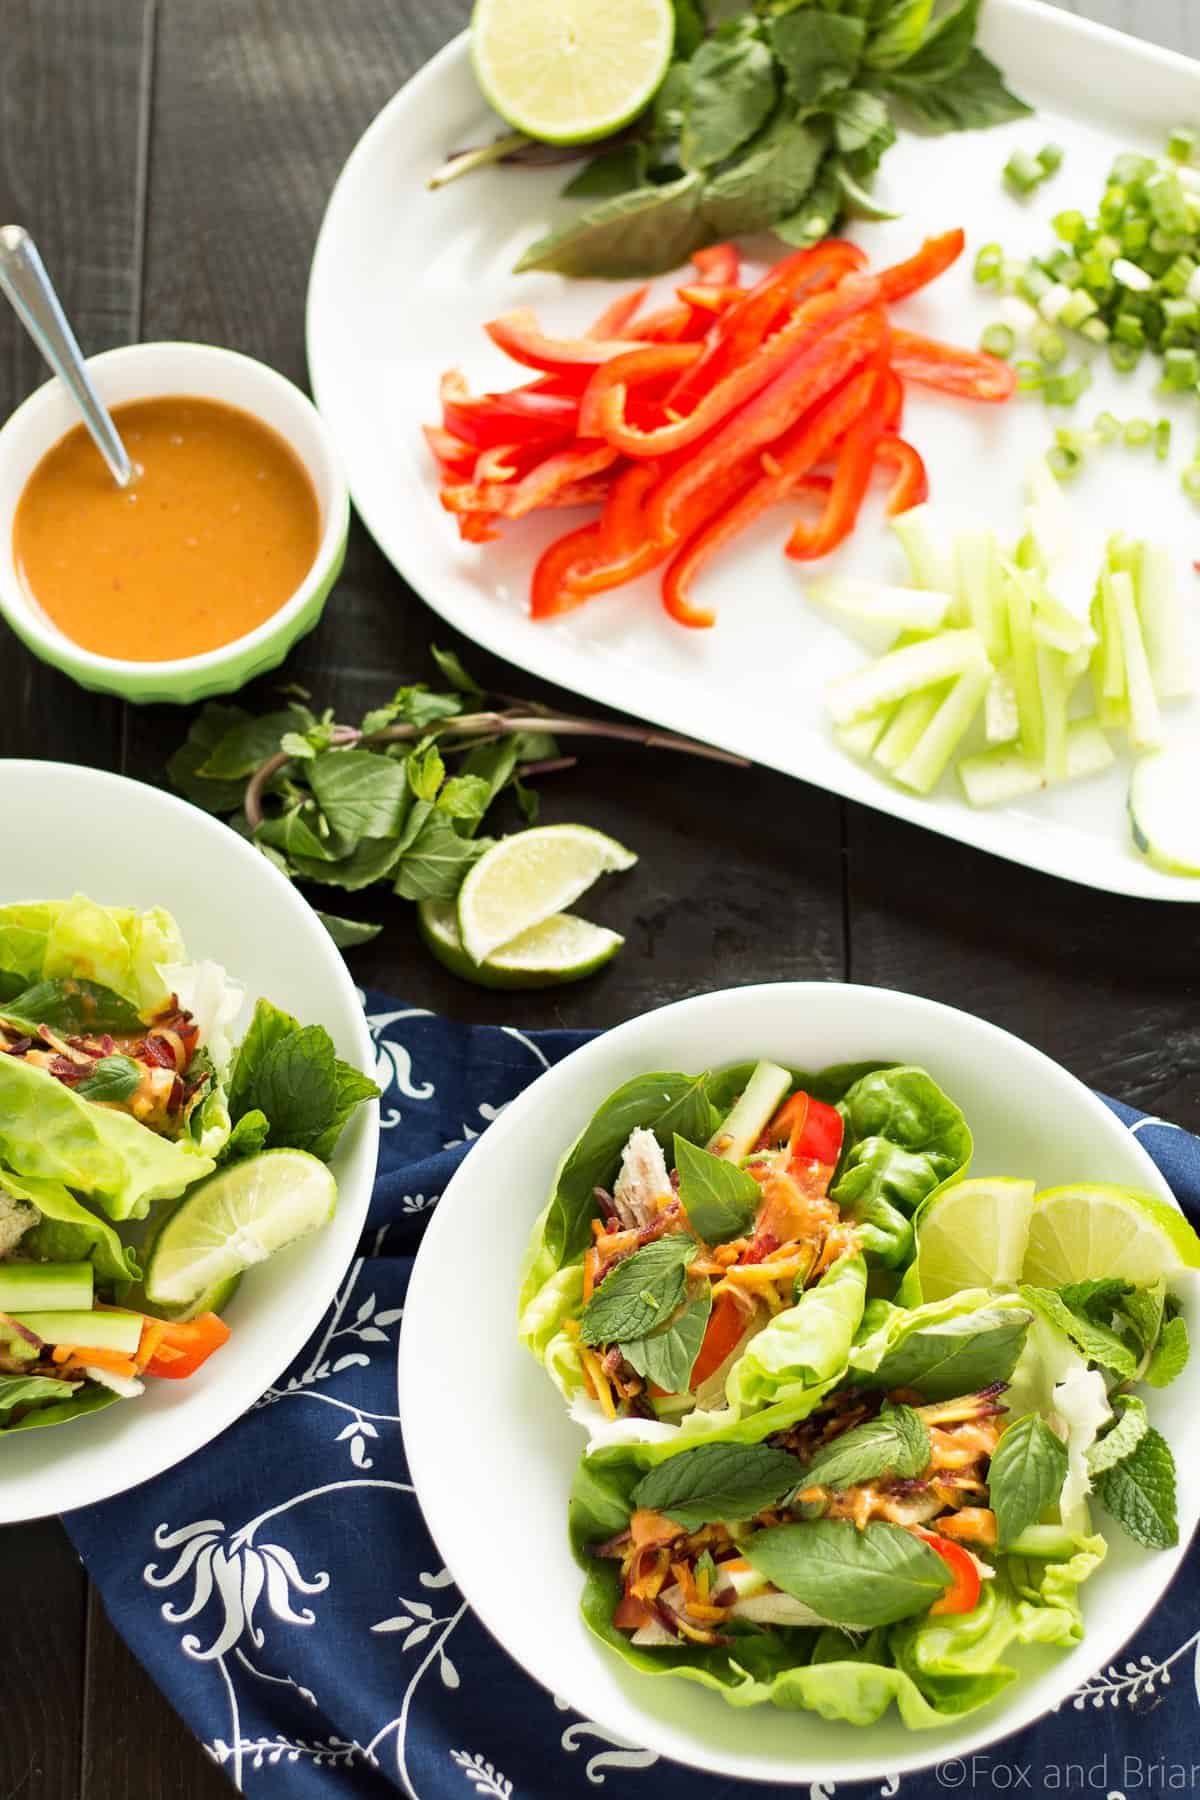 These Ginger peanut lettuce wraps are filled with colorful veggies, your protein of choice, and the most addictive peanut sauce ever!